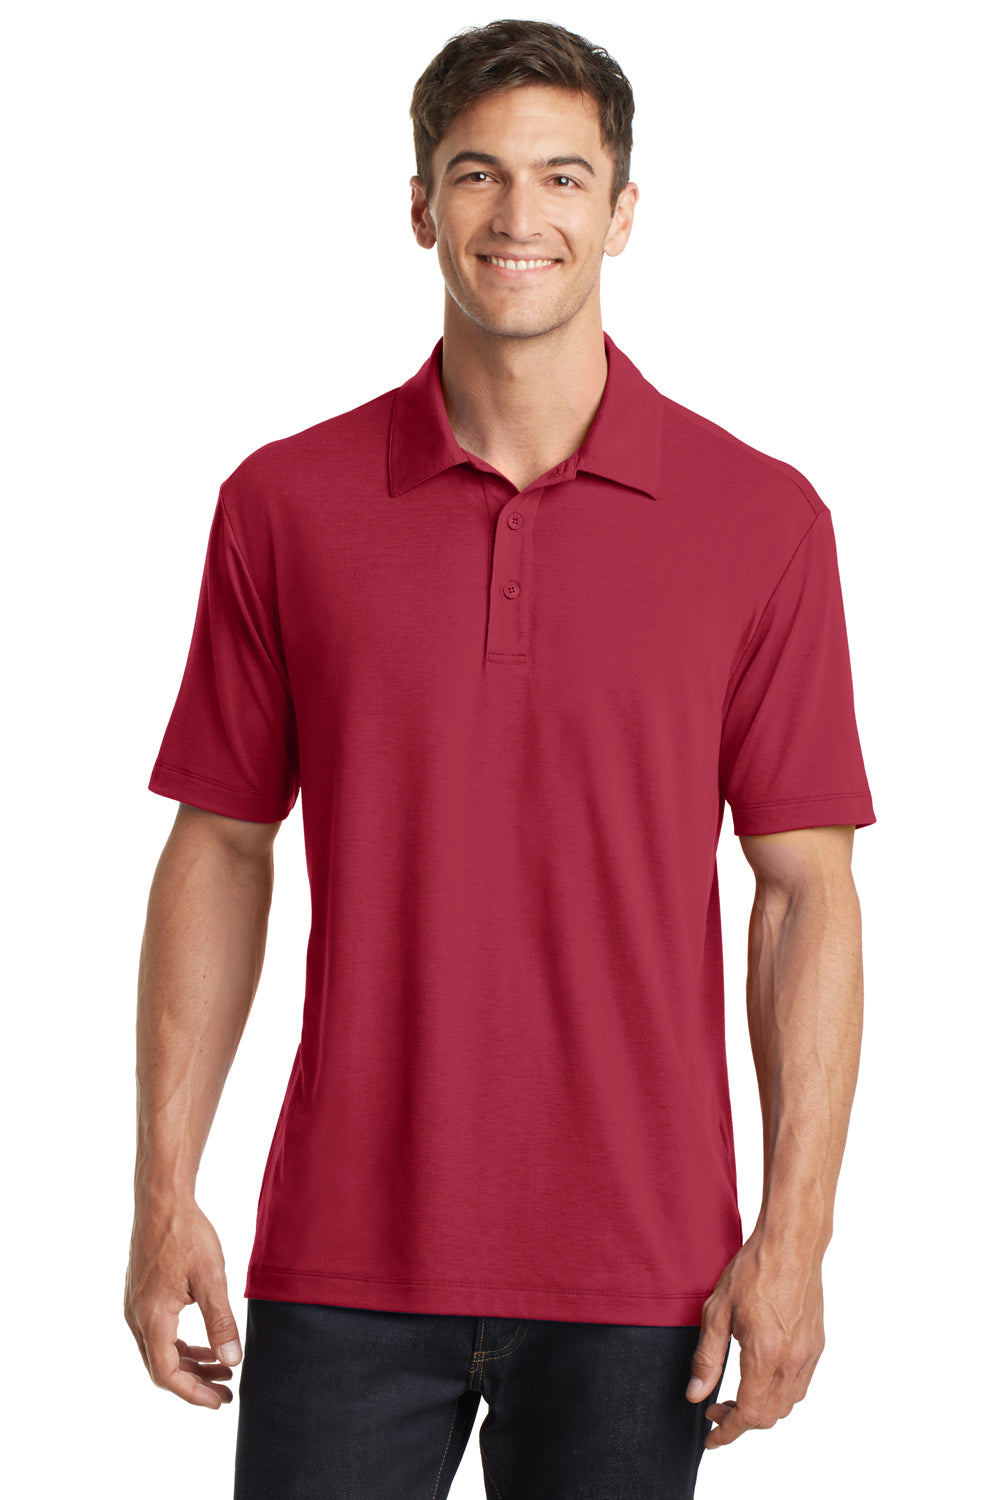 Port Authority K568 Mens Cotton Touch Performance Moisture Wicking Short Sleeve Polo Shirt Red Front